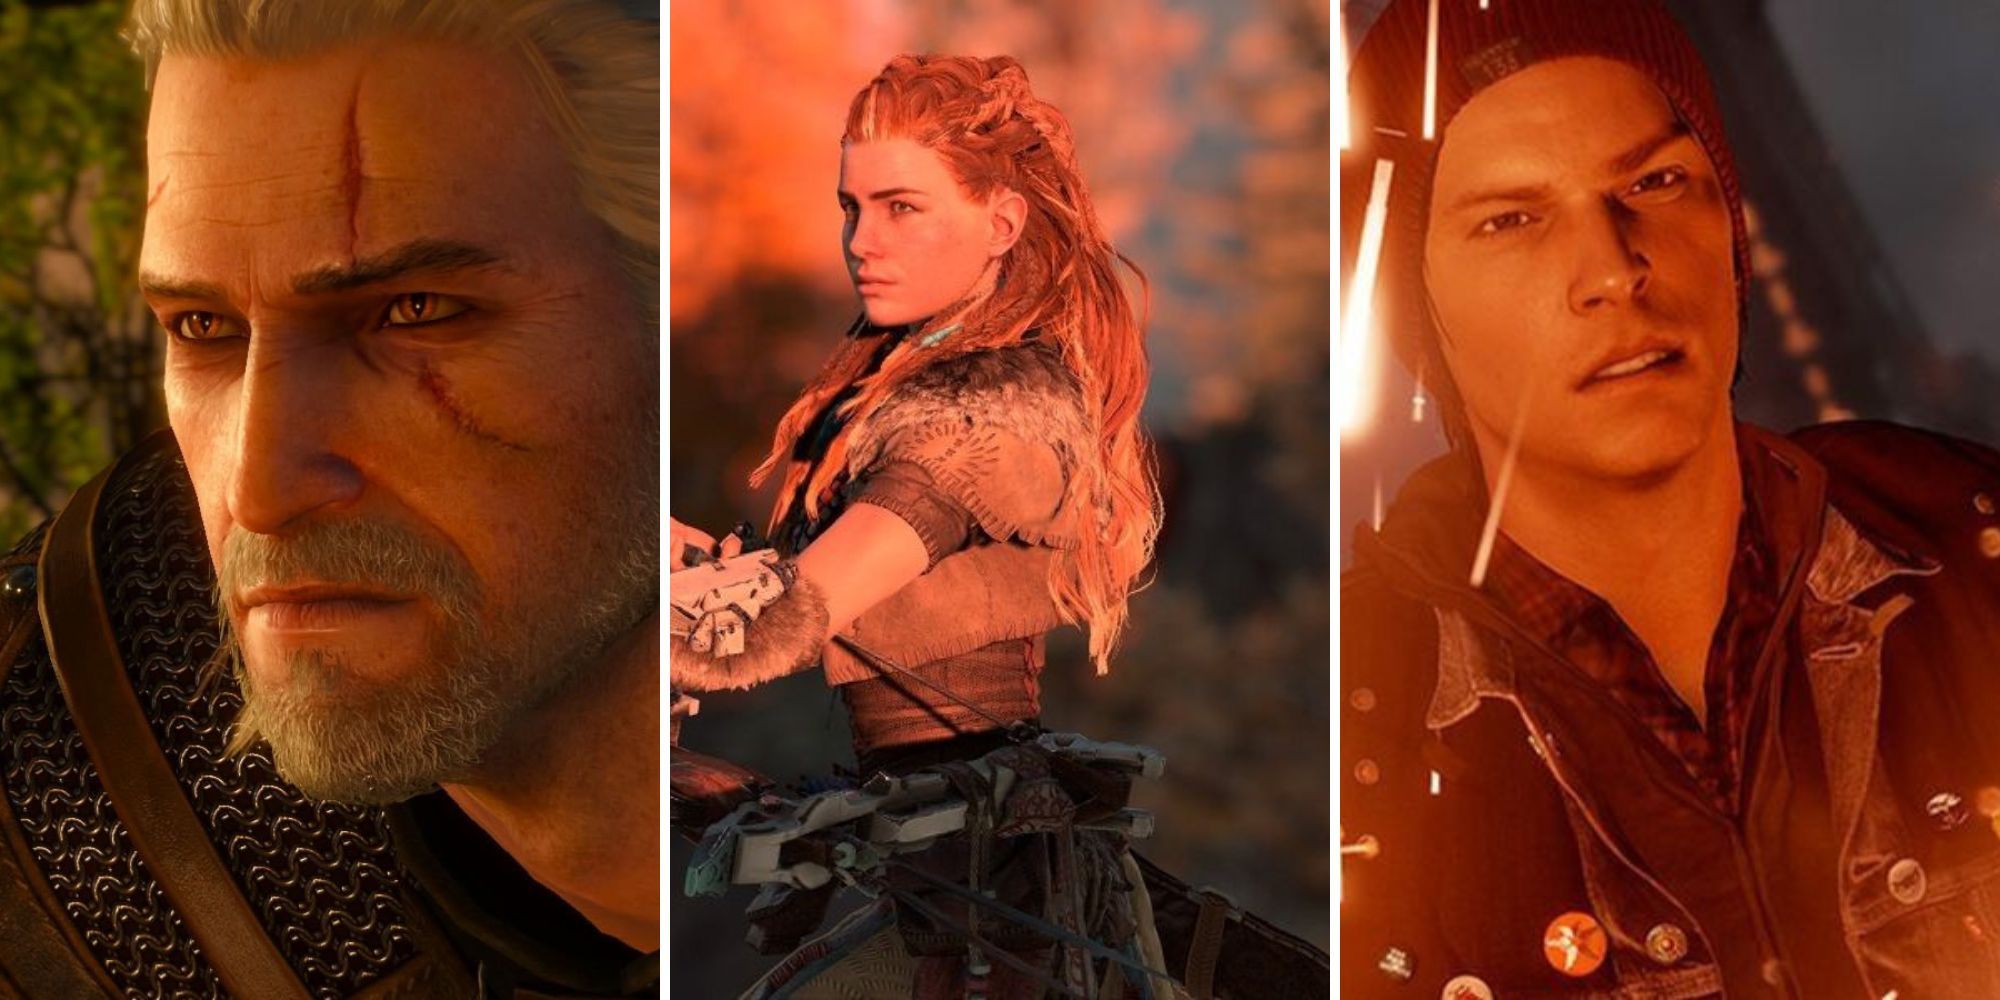 A grid showing the open-world games The Witcher 3: Wild Hunt, Horizon: Zero Dawn, and Infamous: Second Son